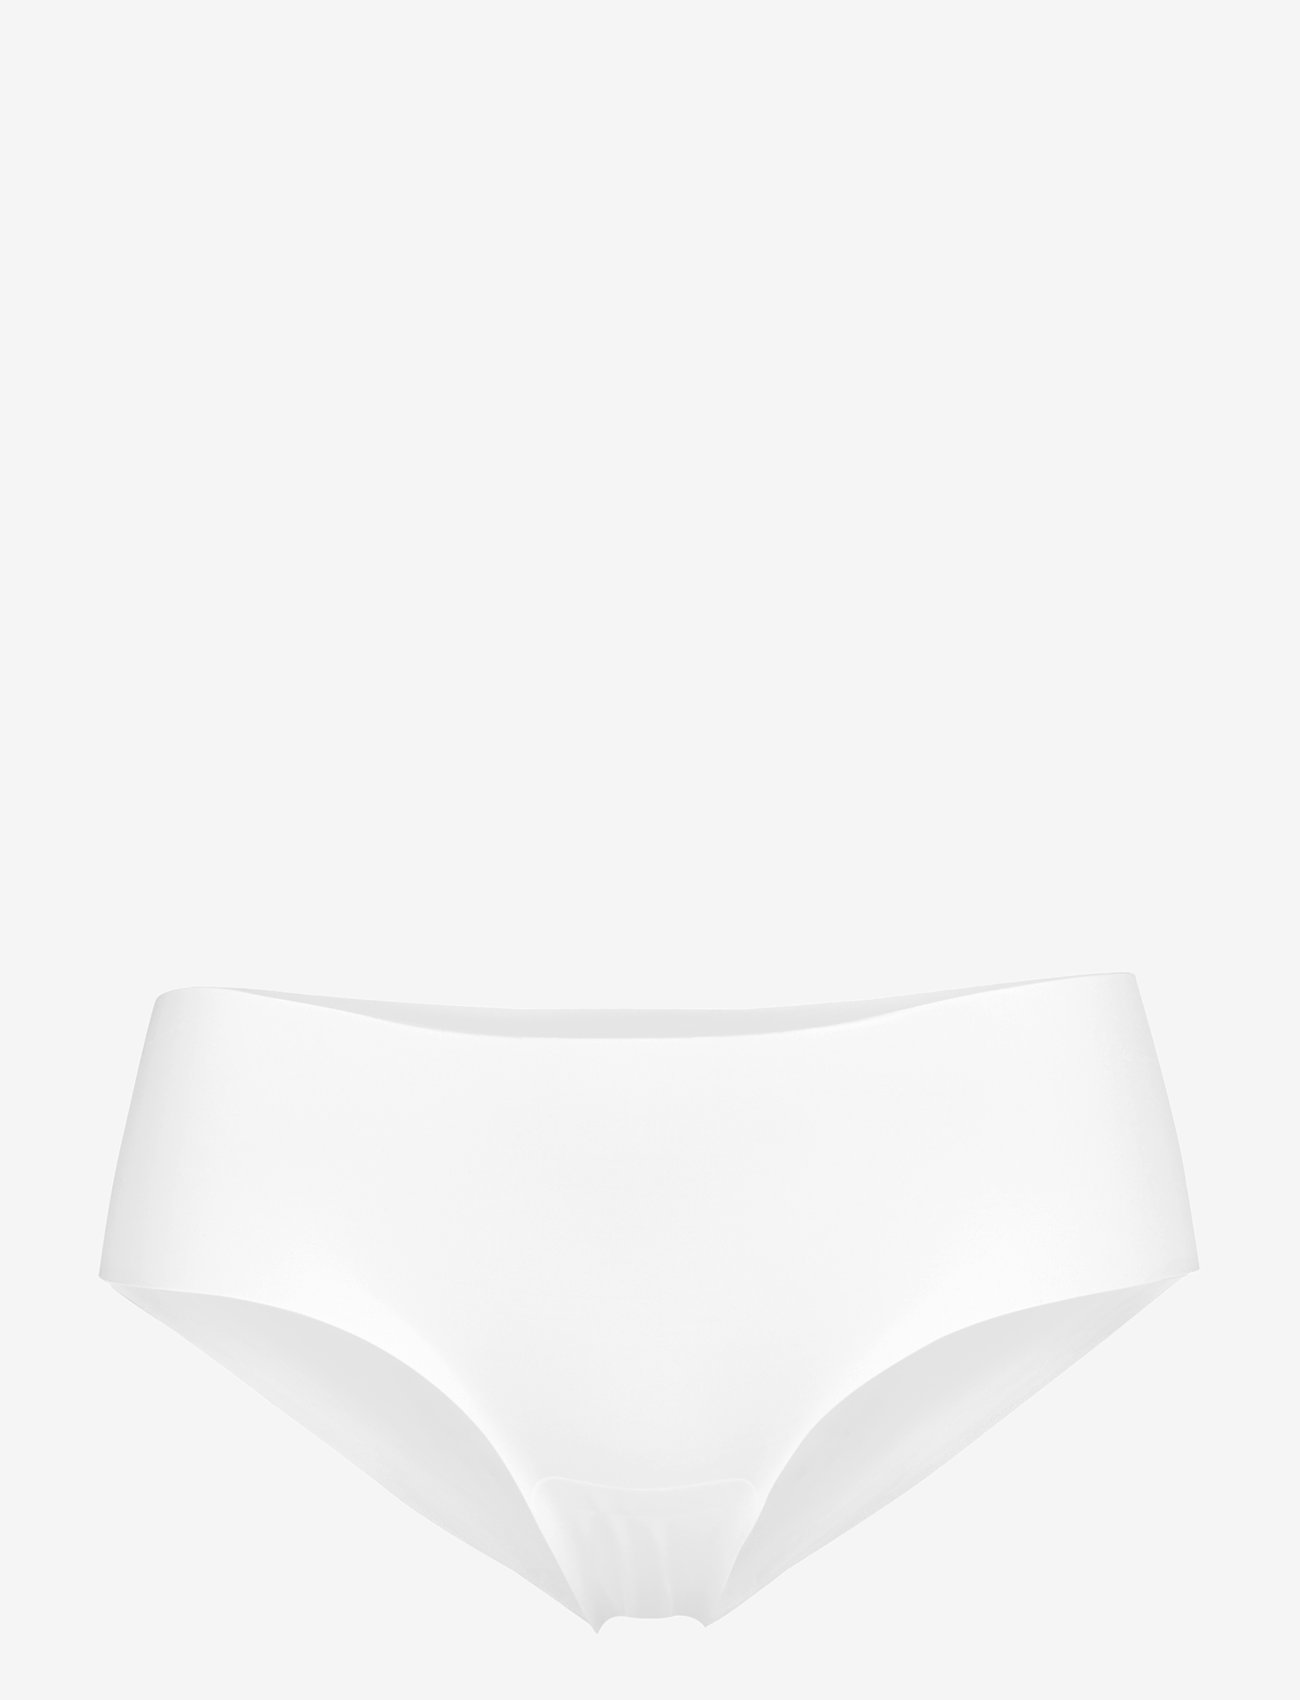 Schiesser - Panty - culottes sans couture - white - 0